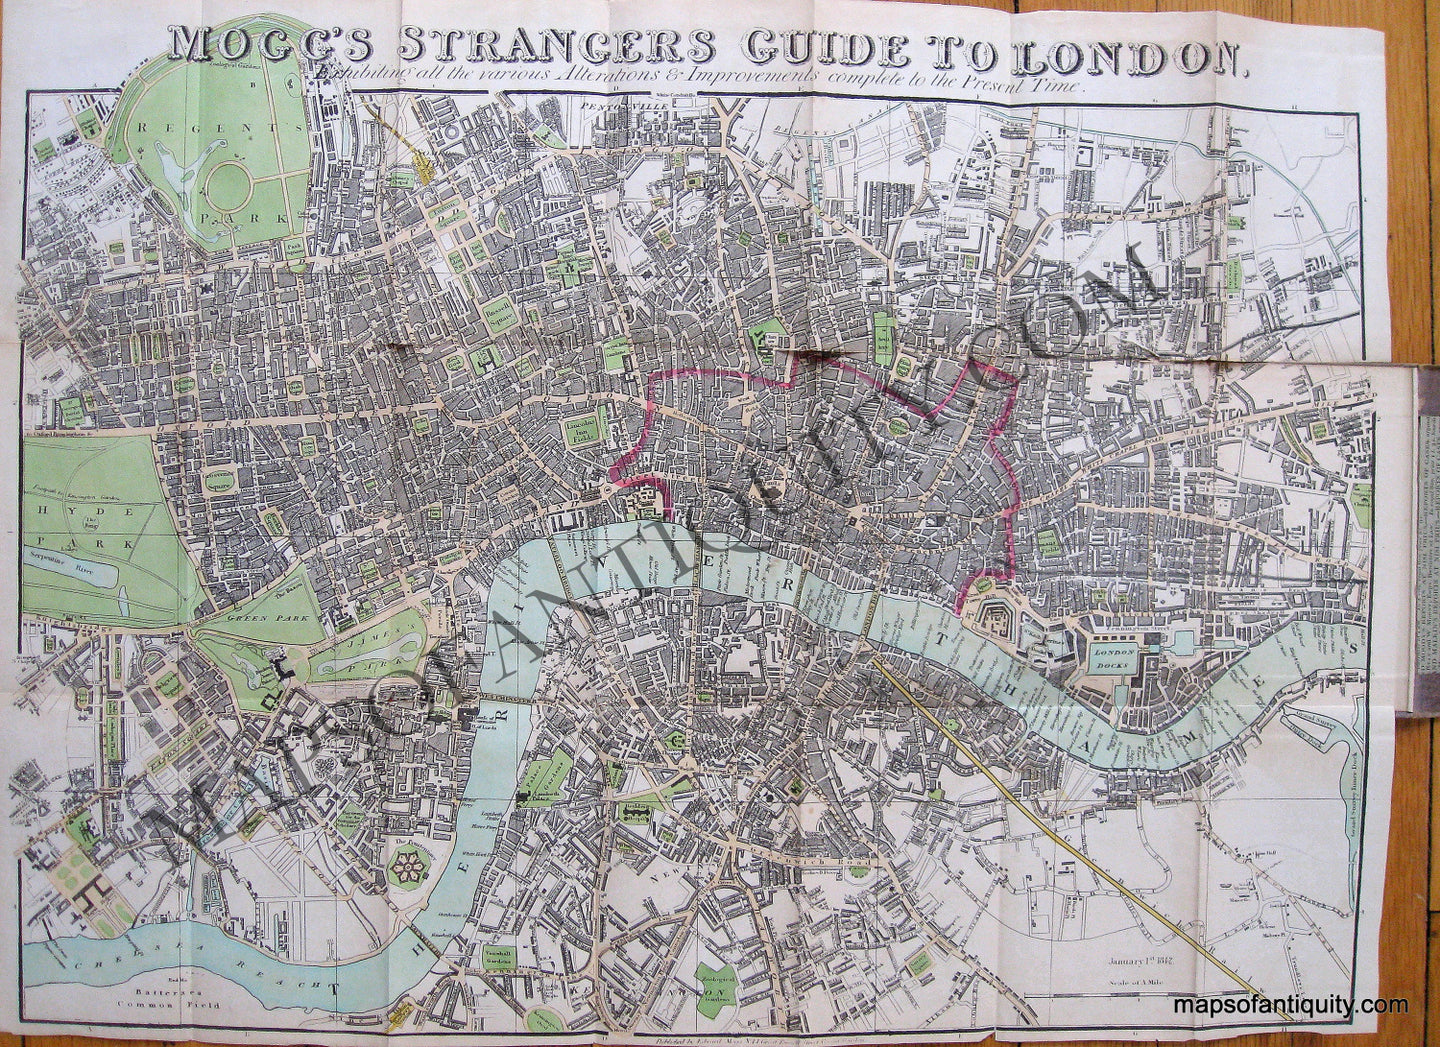 Antique-Book-with-Folding-Maps-Mogg's-New-Picture-of-London.-**********-London-Folding-Maps-1842-Mogg-Maps-Of-Antiquity